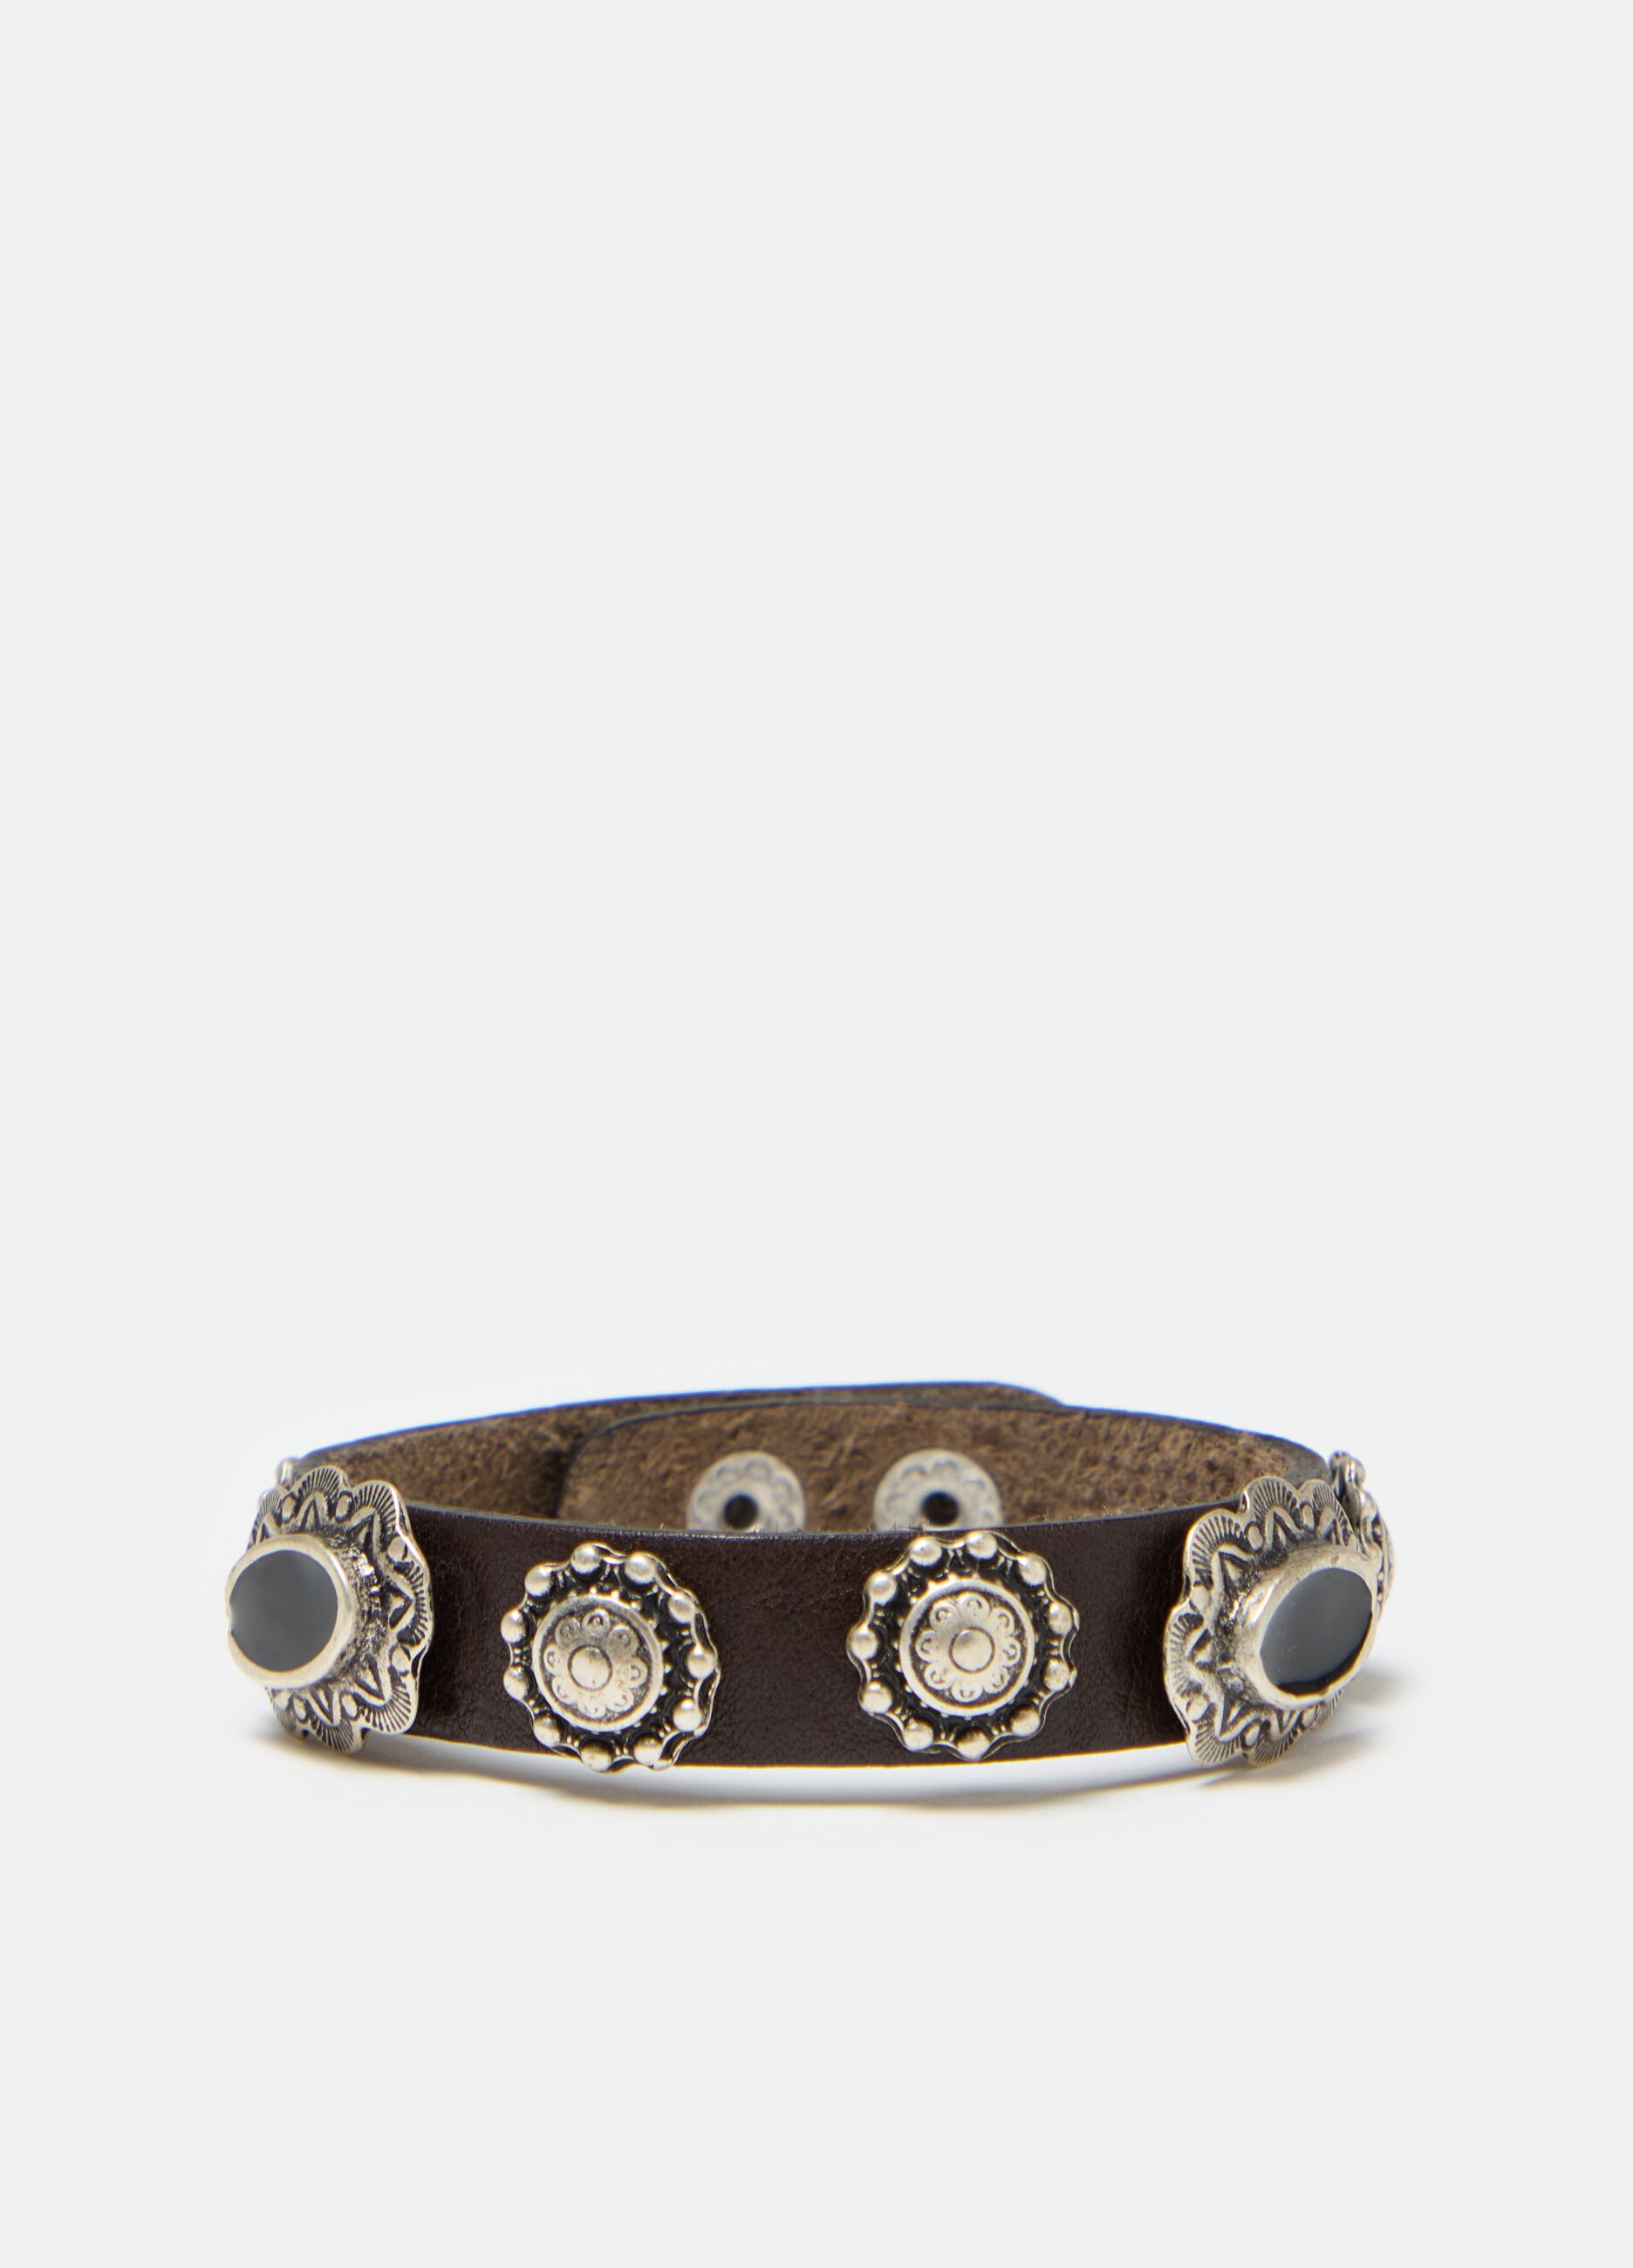 Leather bracelet with conchos